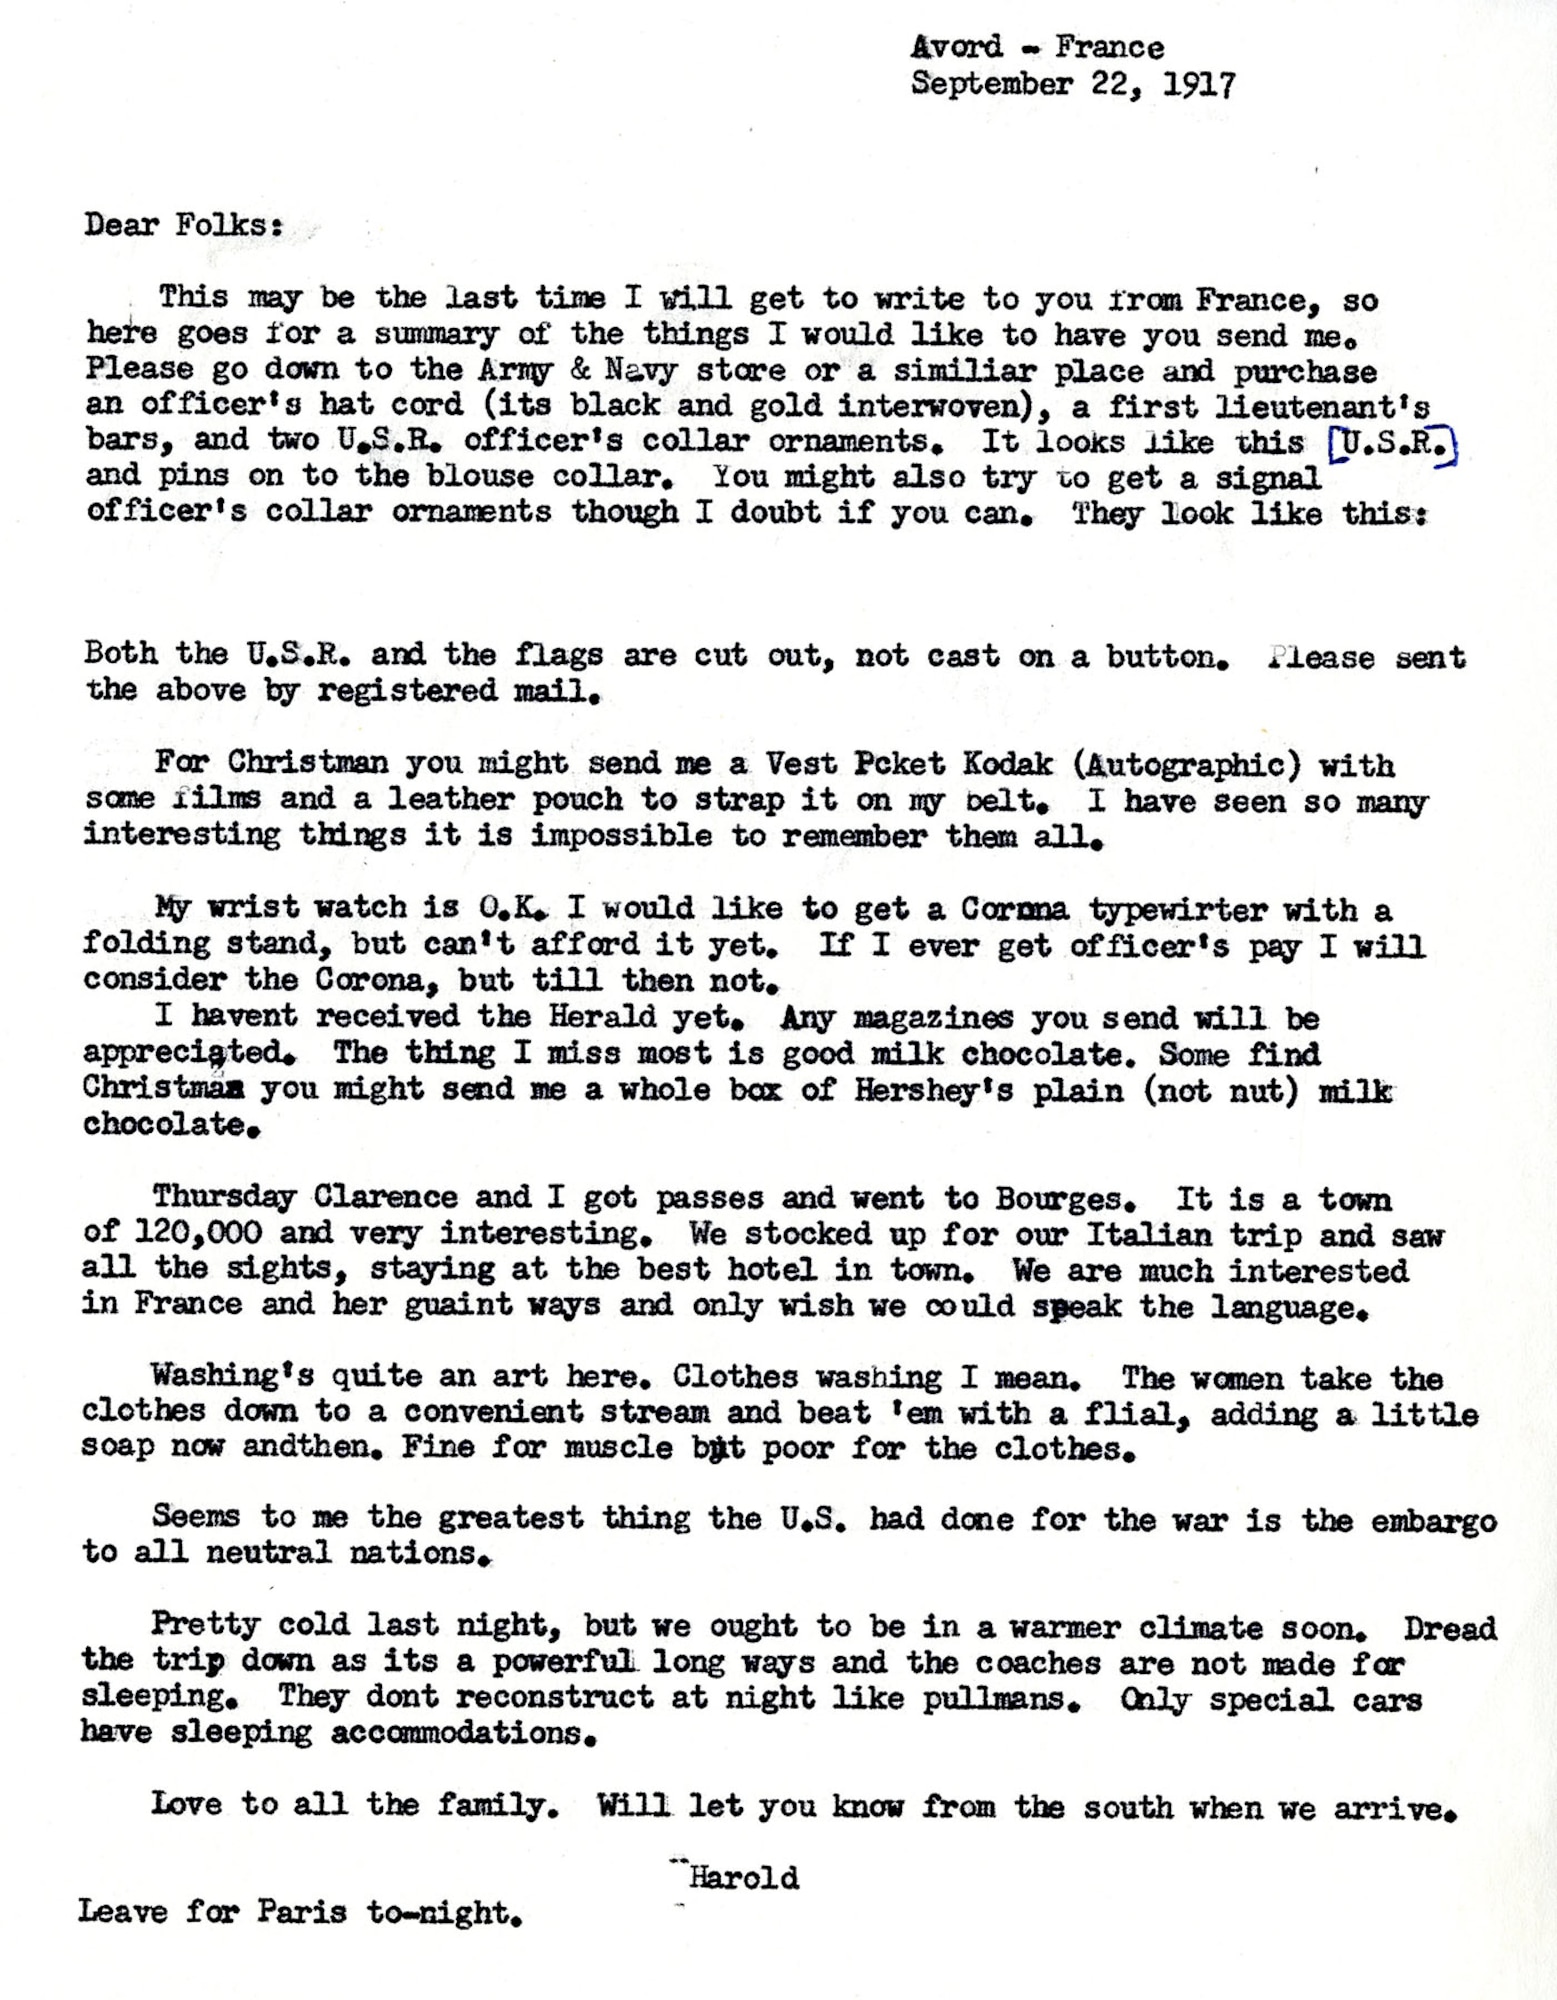 In September 1917, Lt. Harold R. Harris, who had recently completed Ground School at the University of California Berkeley, was en-route to Italy, to assist in establishing the 8th Aviation Instruction Center for the Allied Expeditionary Force in Foggia. This is a transcription of the letter Harris wrote to his family before leaving France. He asked them to send him several things, including new officer's insignia and magazines. (U.S. Air Force photo)